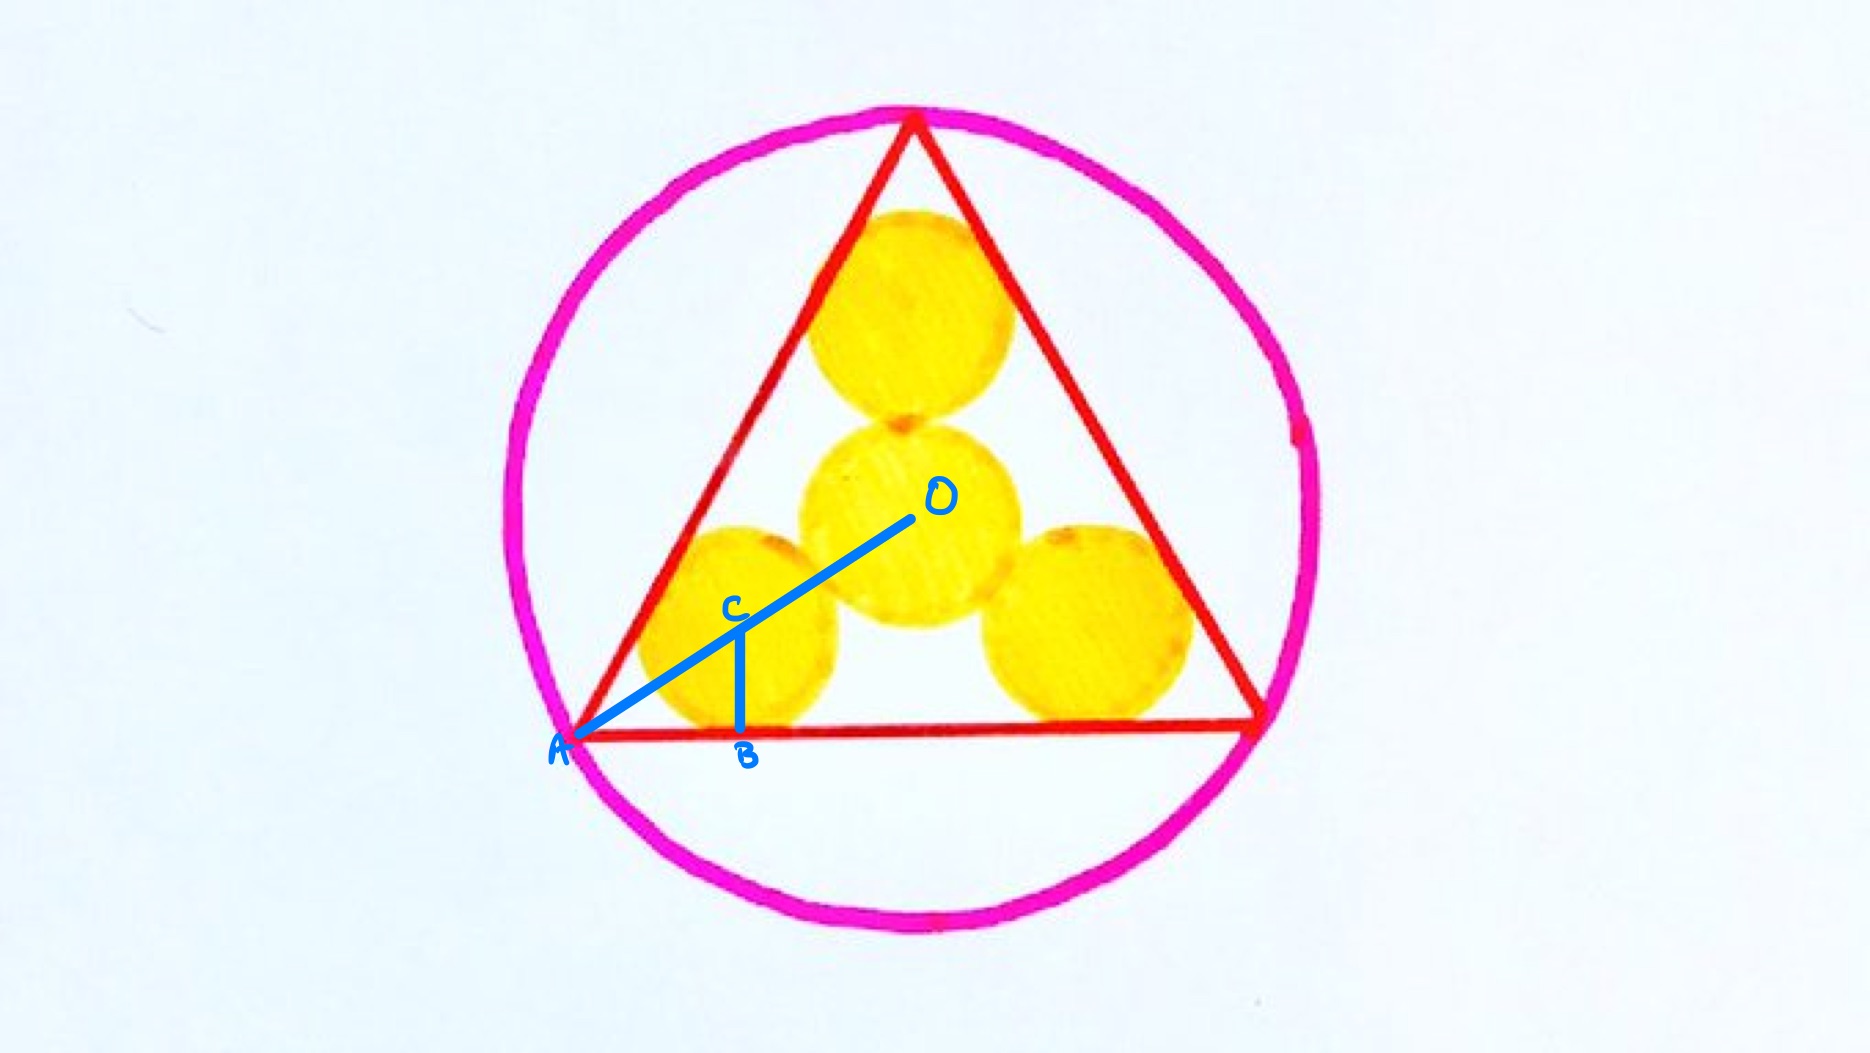 Four circles in a triangle in a circle labelled